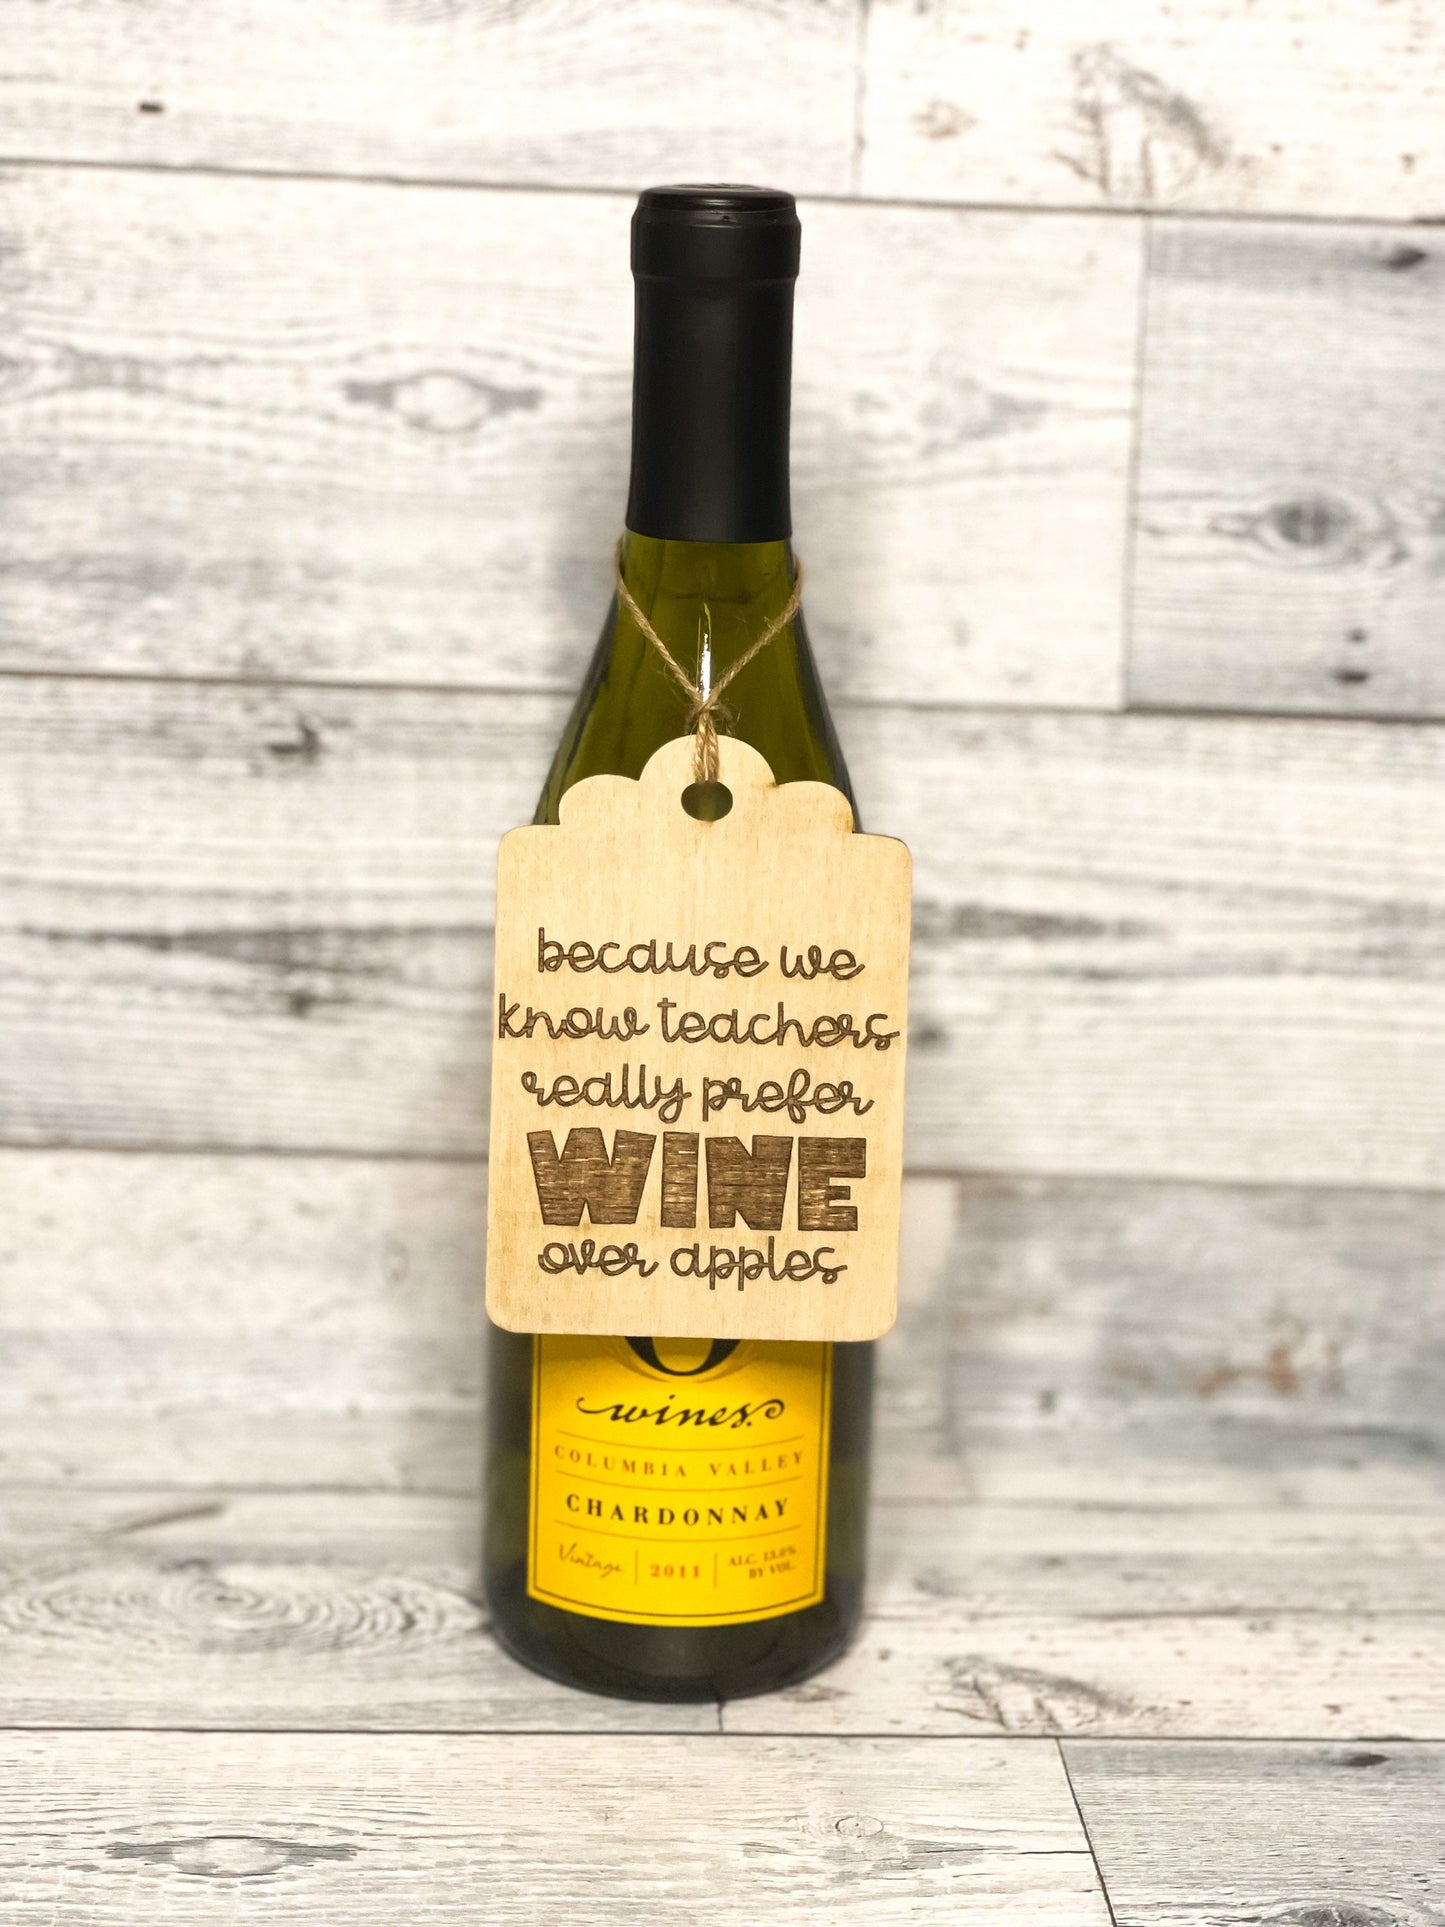 Wood Wine Tag - Spirits Tag - Hostess Gift - Housewarming - Party Favor - Wine Lover Gift - Wine Humor